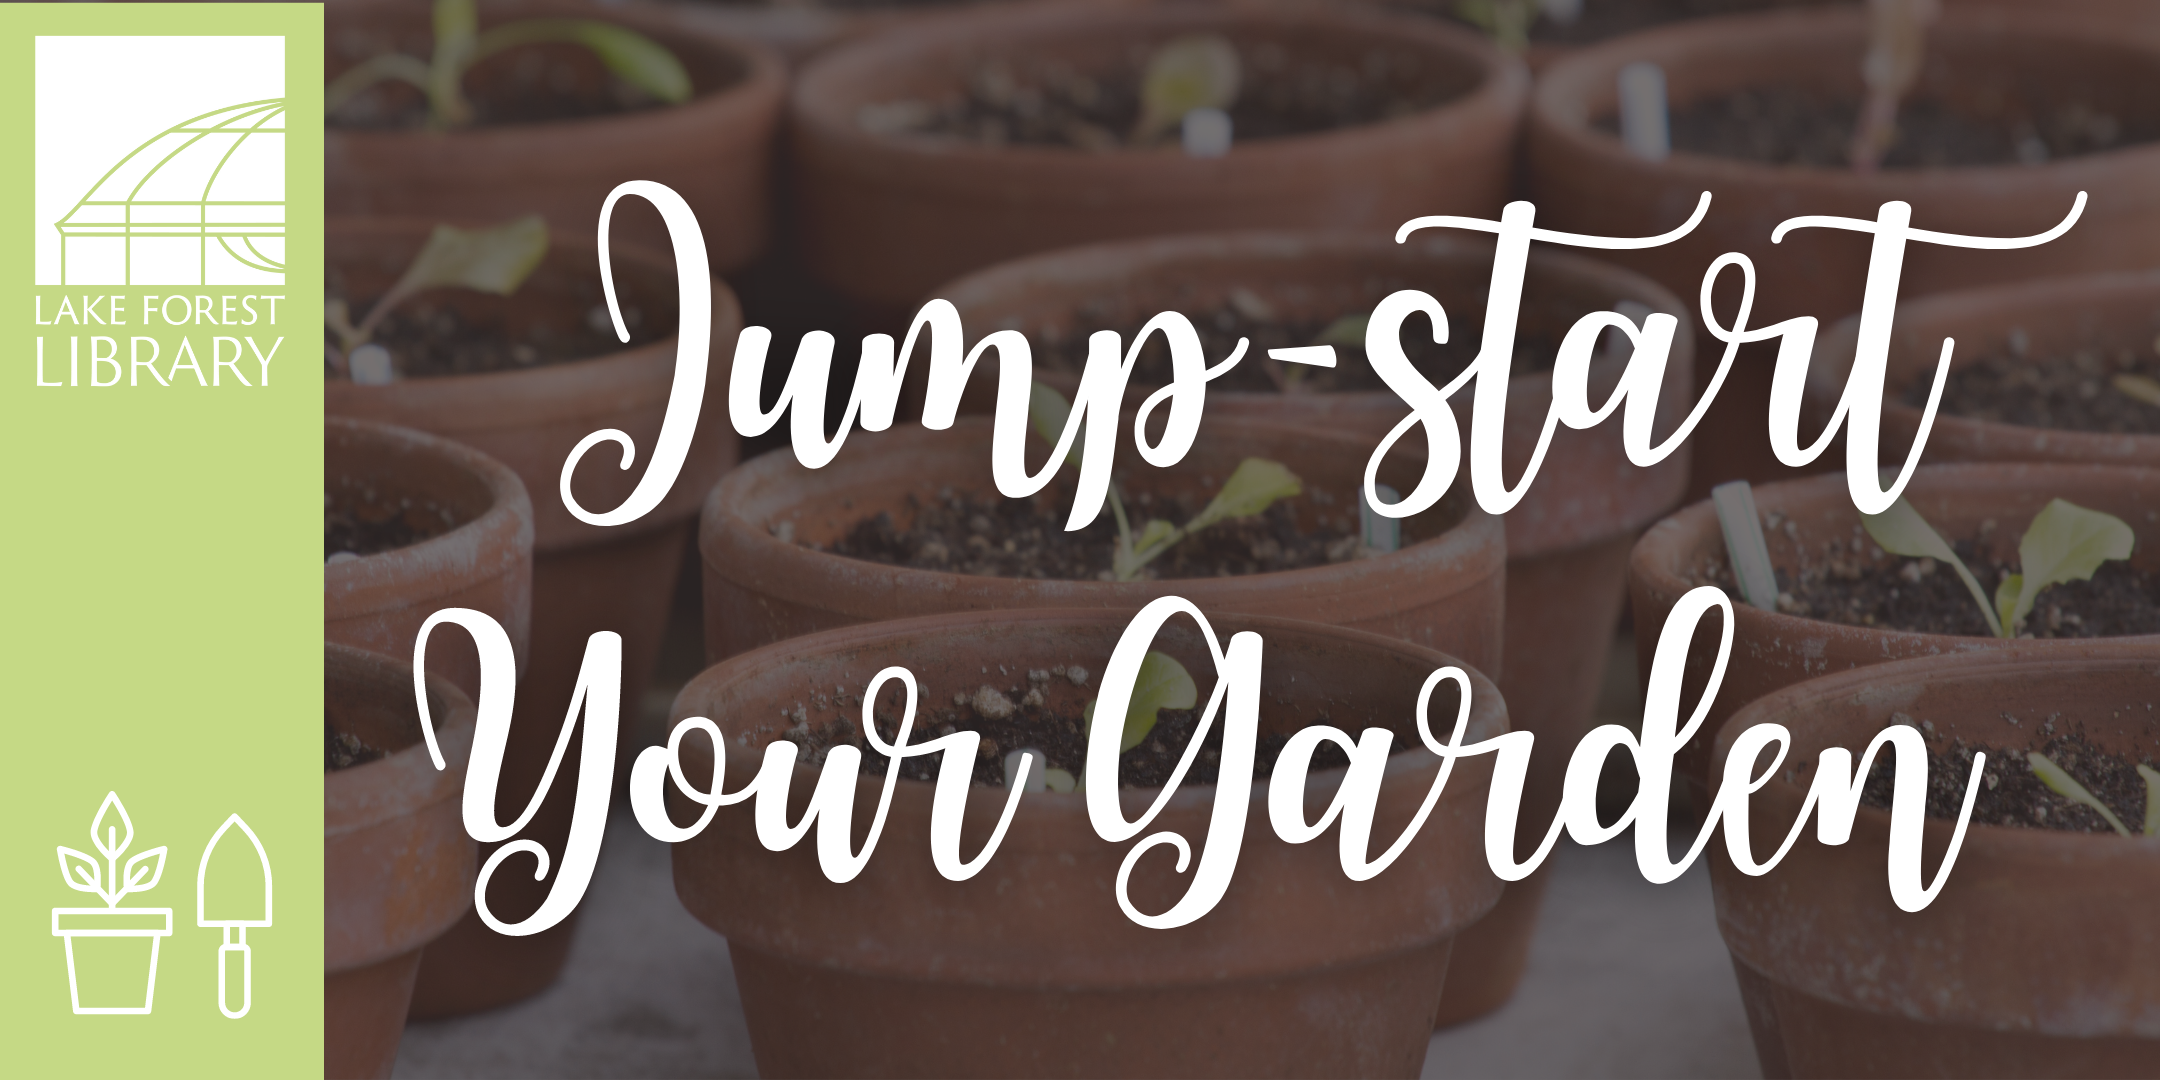 Jump-start Your Garden image with seeds started in pots in the background